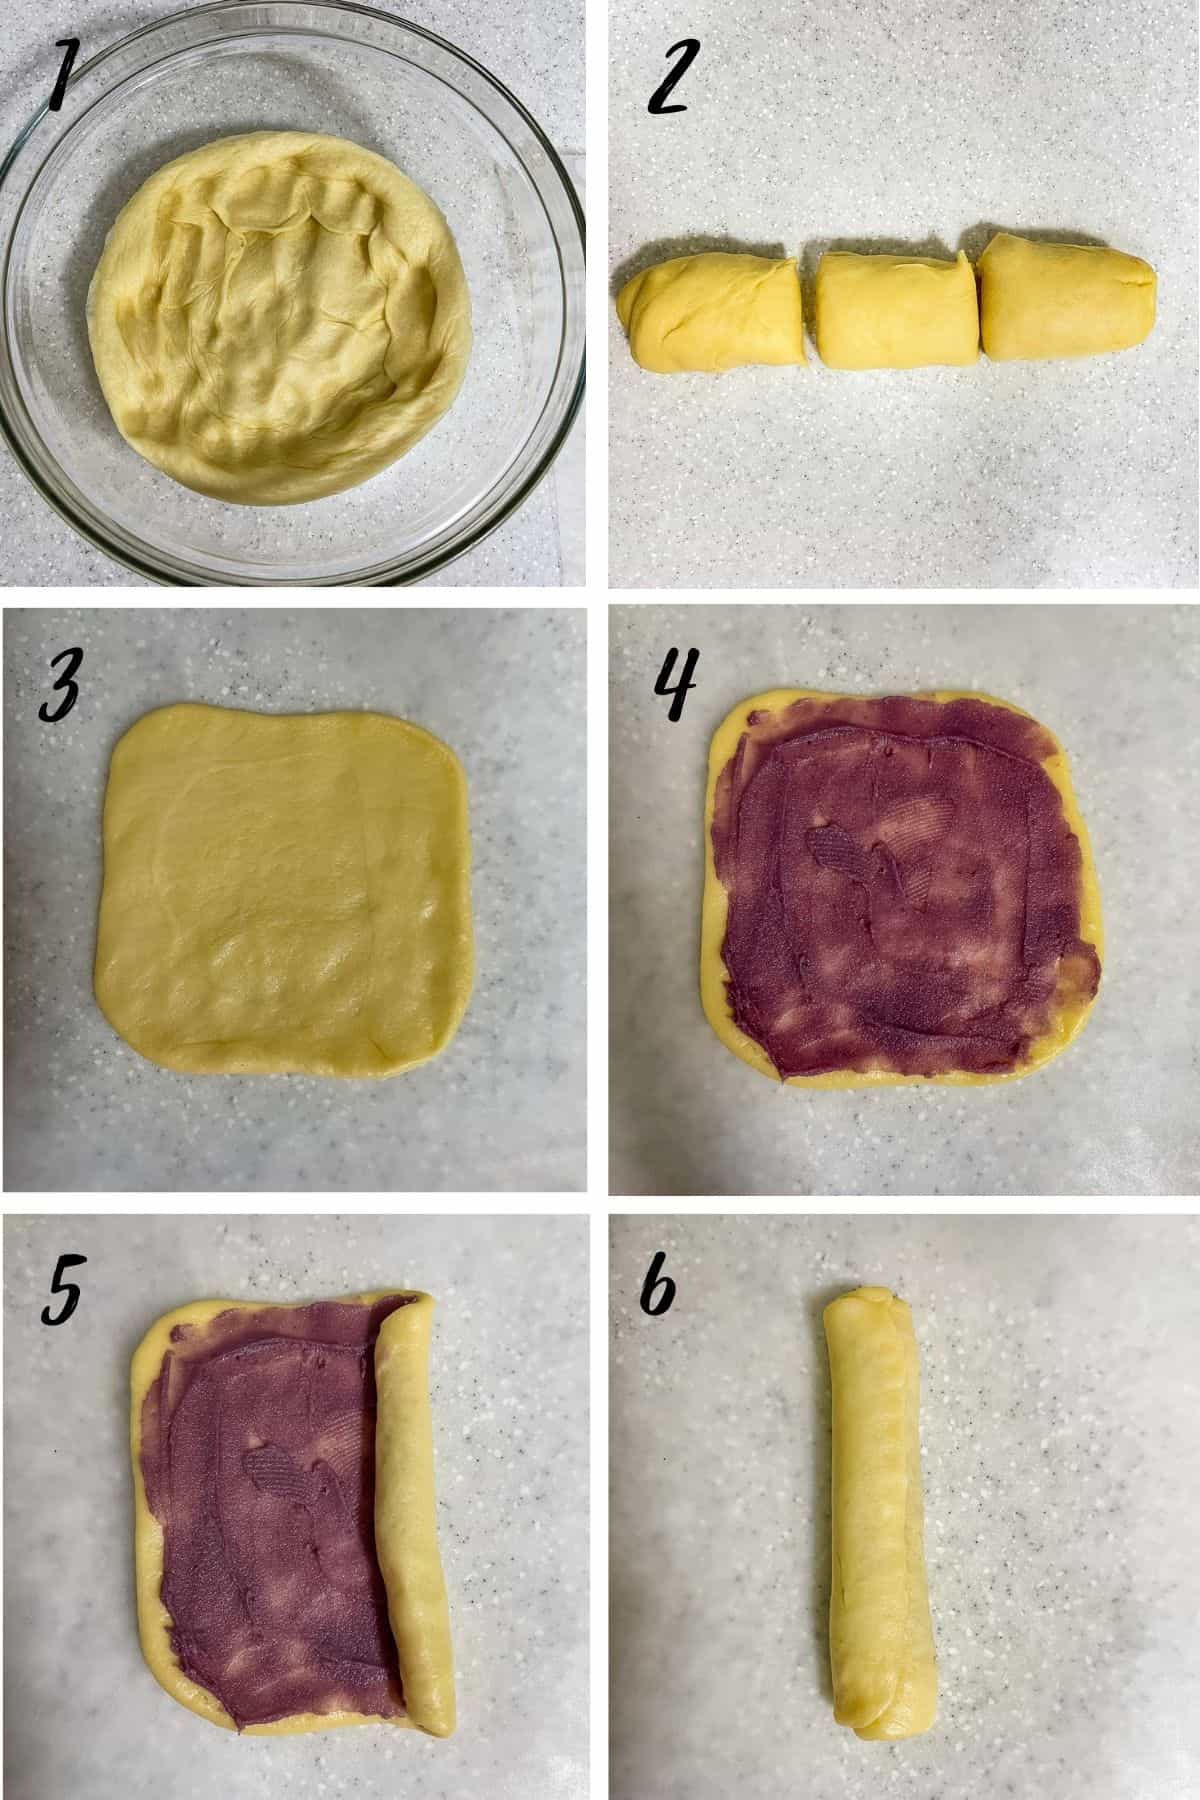 A poster of 6 images showing how to spread ube jam and roll the bread dough